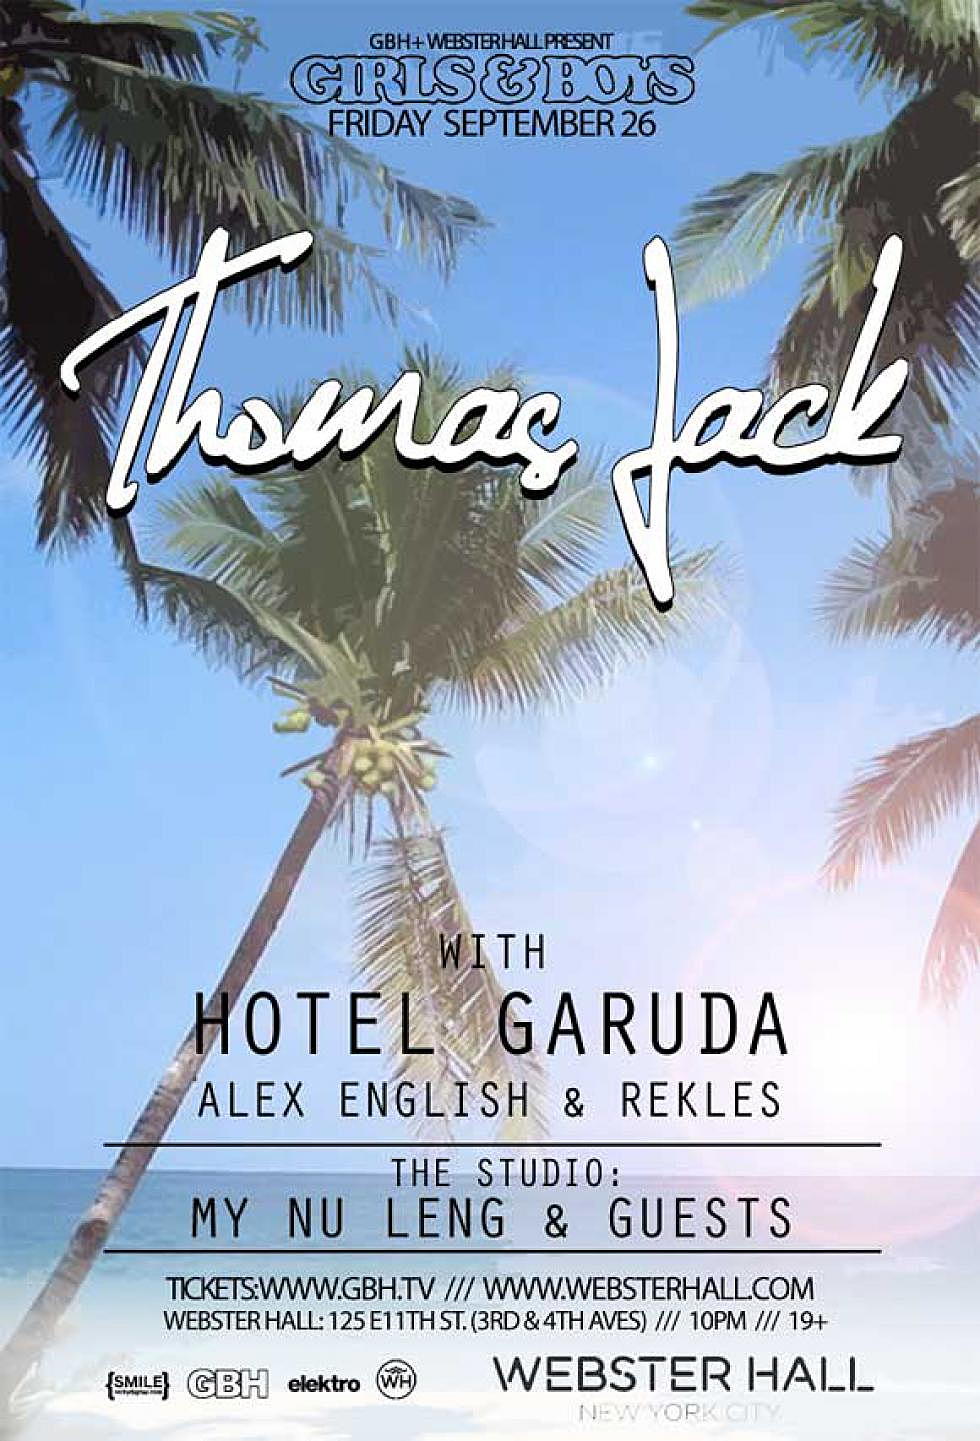 Contest: Win a VIP Table for 4 @ Webster Hall for Thomas Jack w/ Hotel Garuda, 9/26